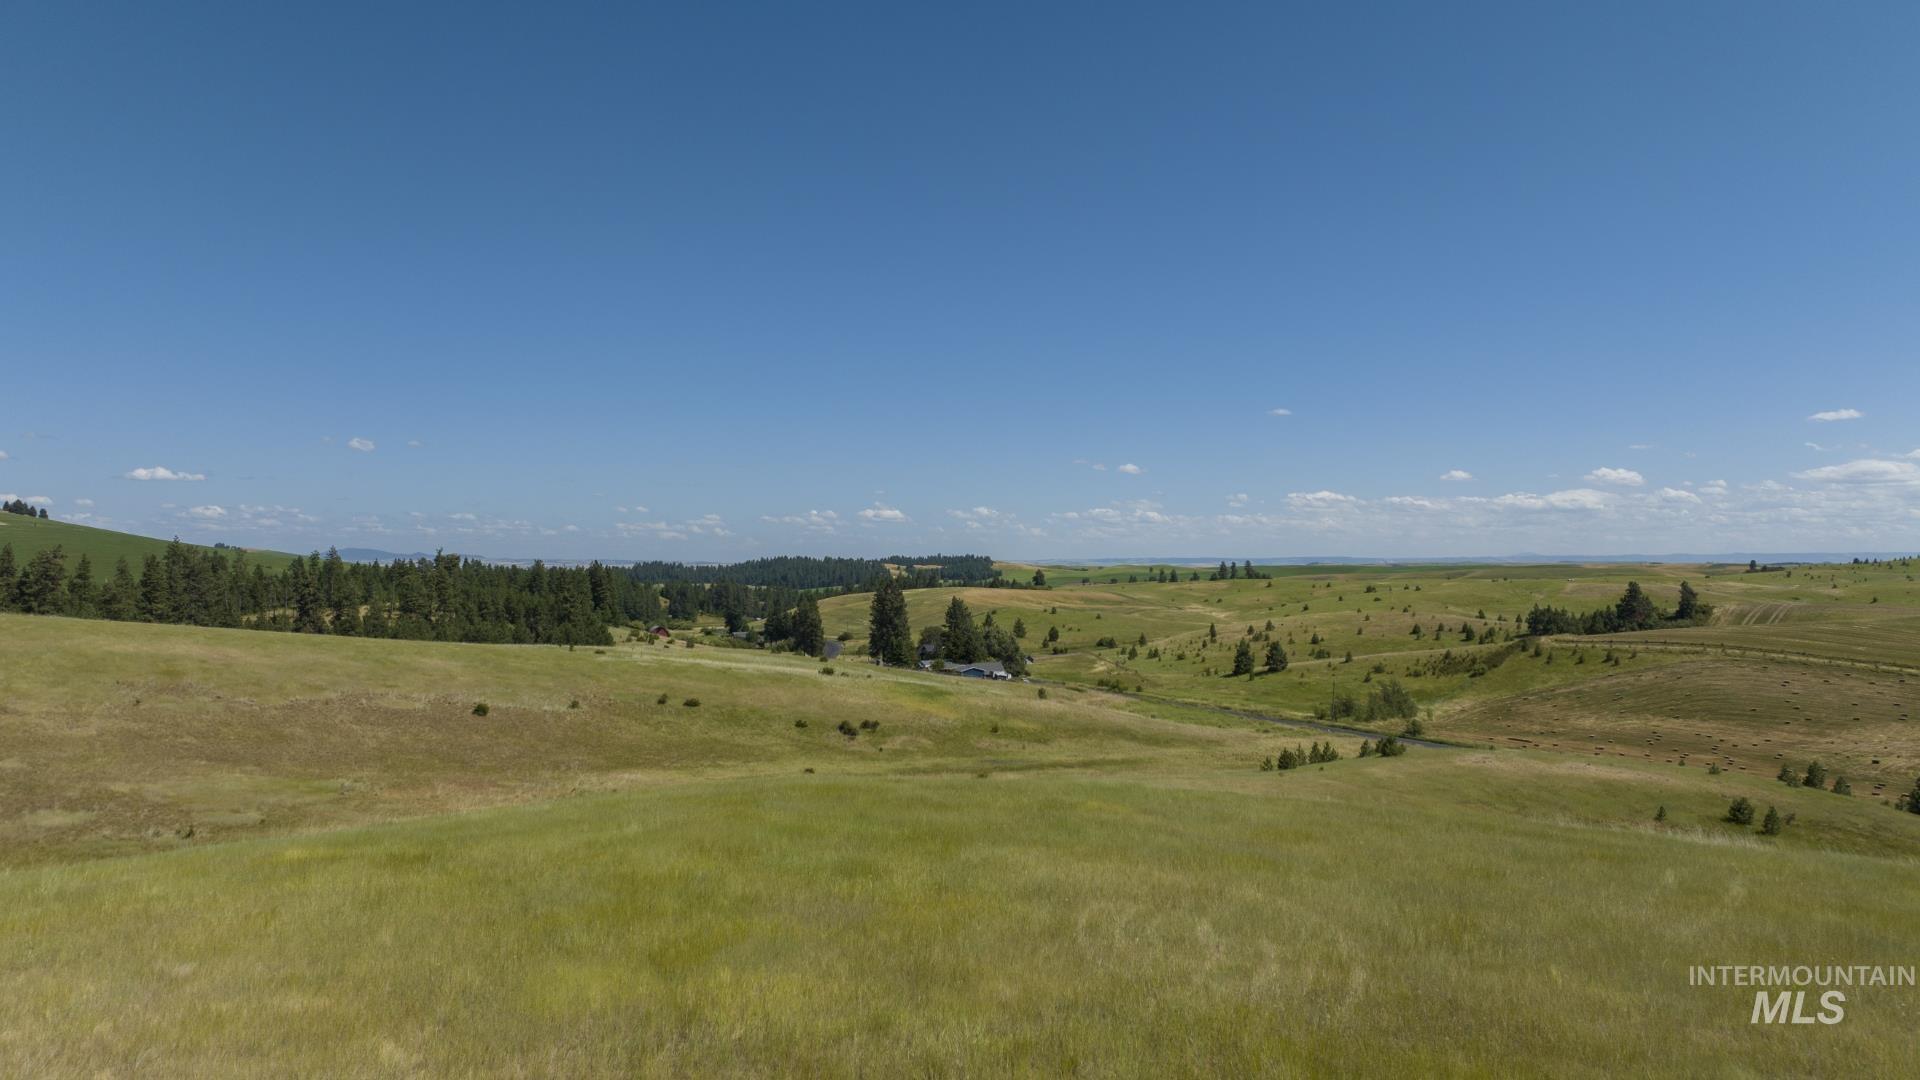 TBD Parcel # 2 Lenville, Moscow, Idaho 83843, Land For Sale, Price $472,305,MLS 98906677